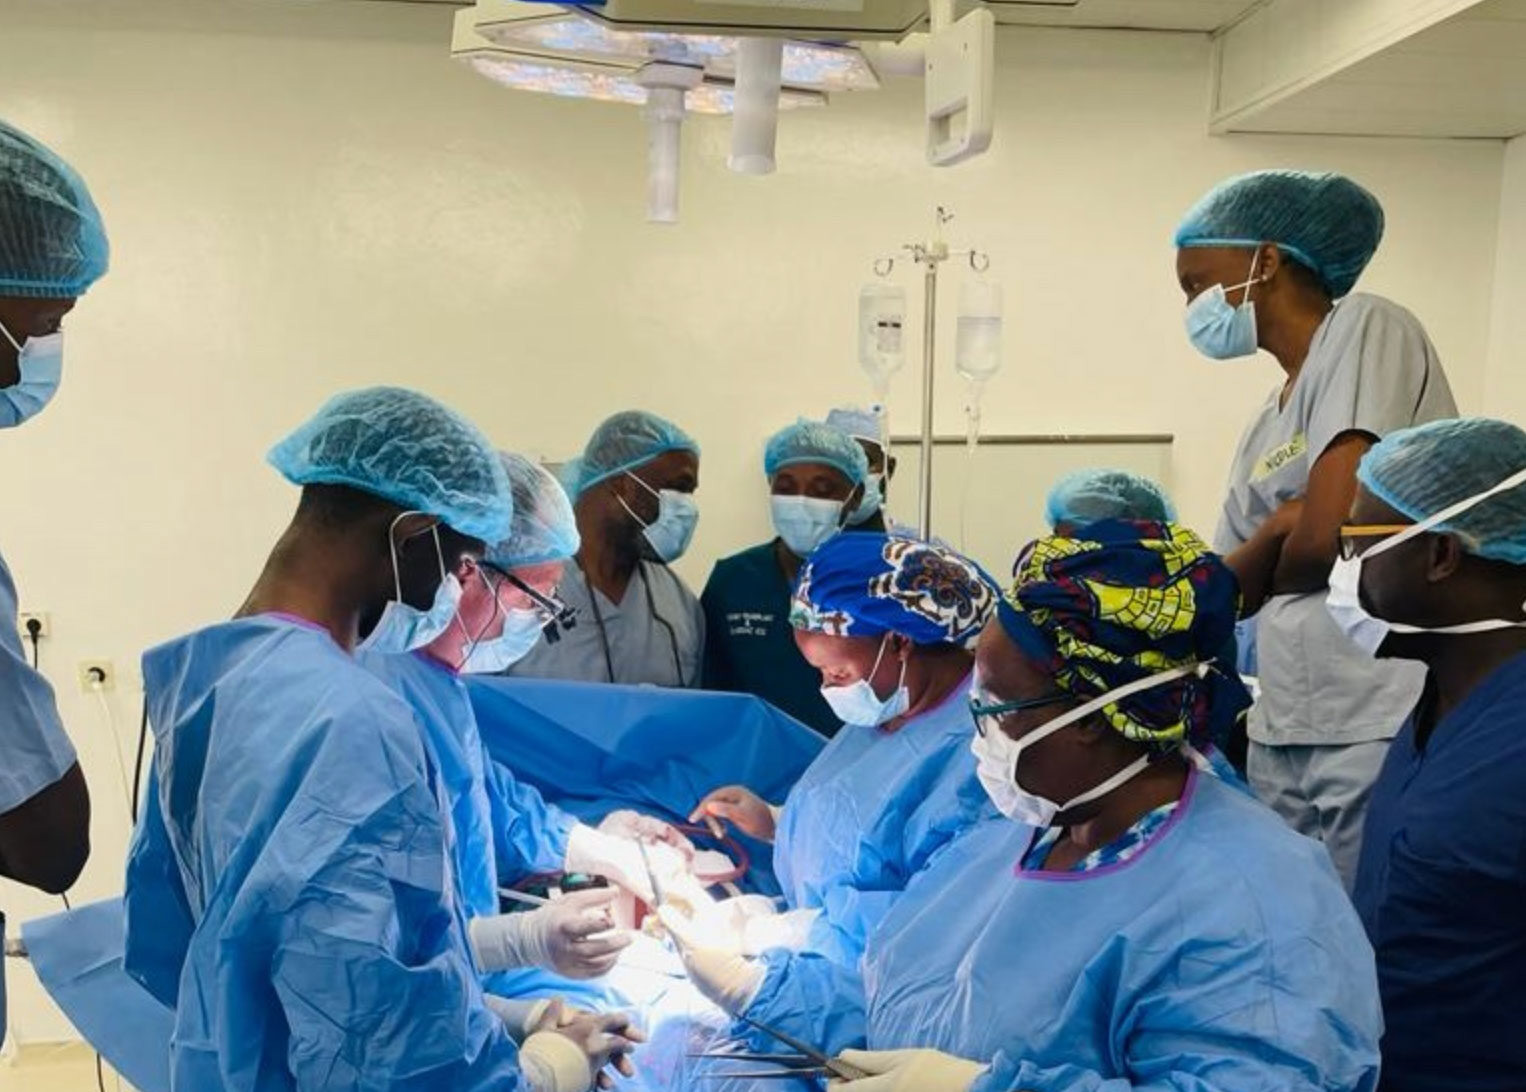 Jeffrey Punch, third from left, works with a trainee on a kidney transplant as other team members and students observe. At the head of the table observing are, at left, Lloyd Brown, a transplant surgeon from Rush University, and, at right, Sabin Nsanzimana, Rwanda’s minister of health.